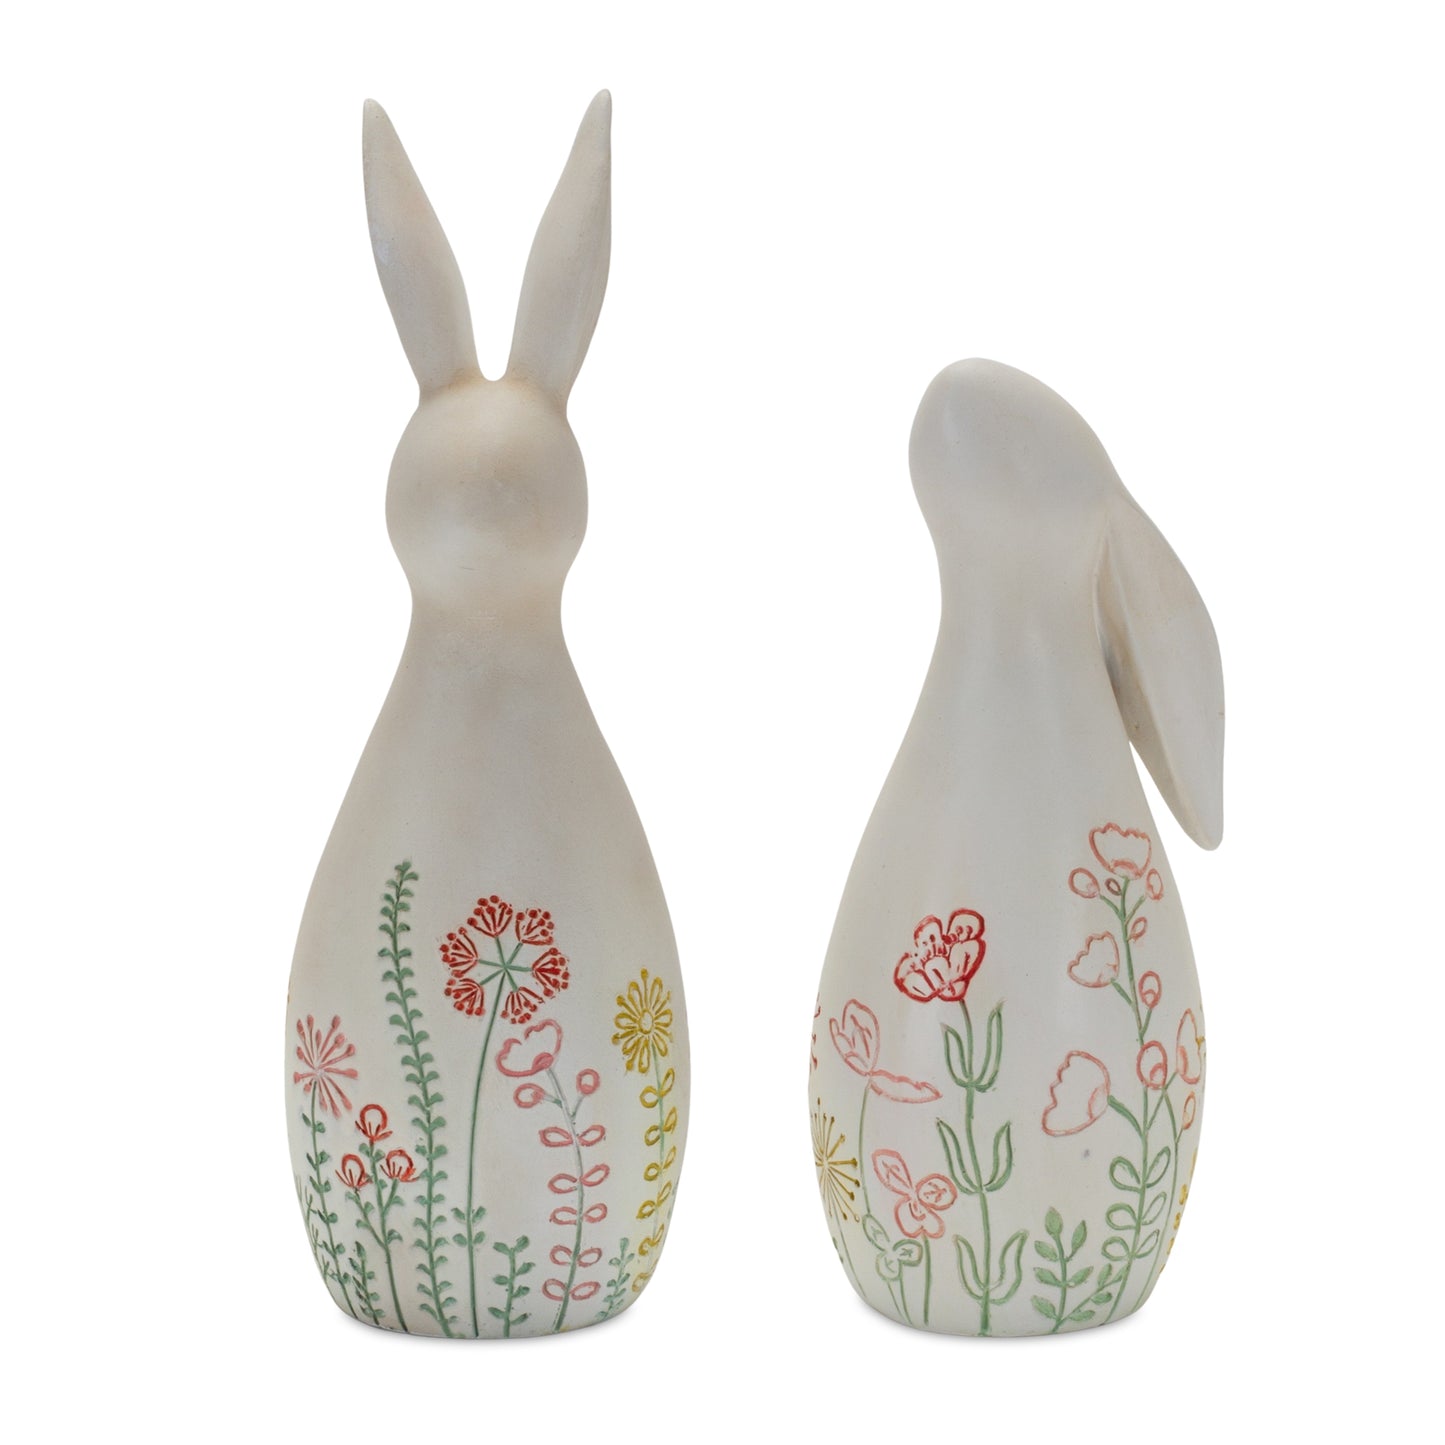 Modern Bunny Rabbit Figurine with Etched Floral Design (Set of 2)